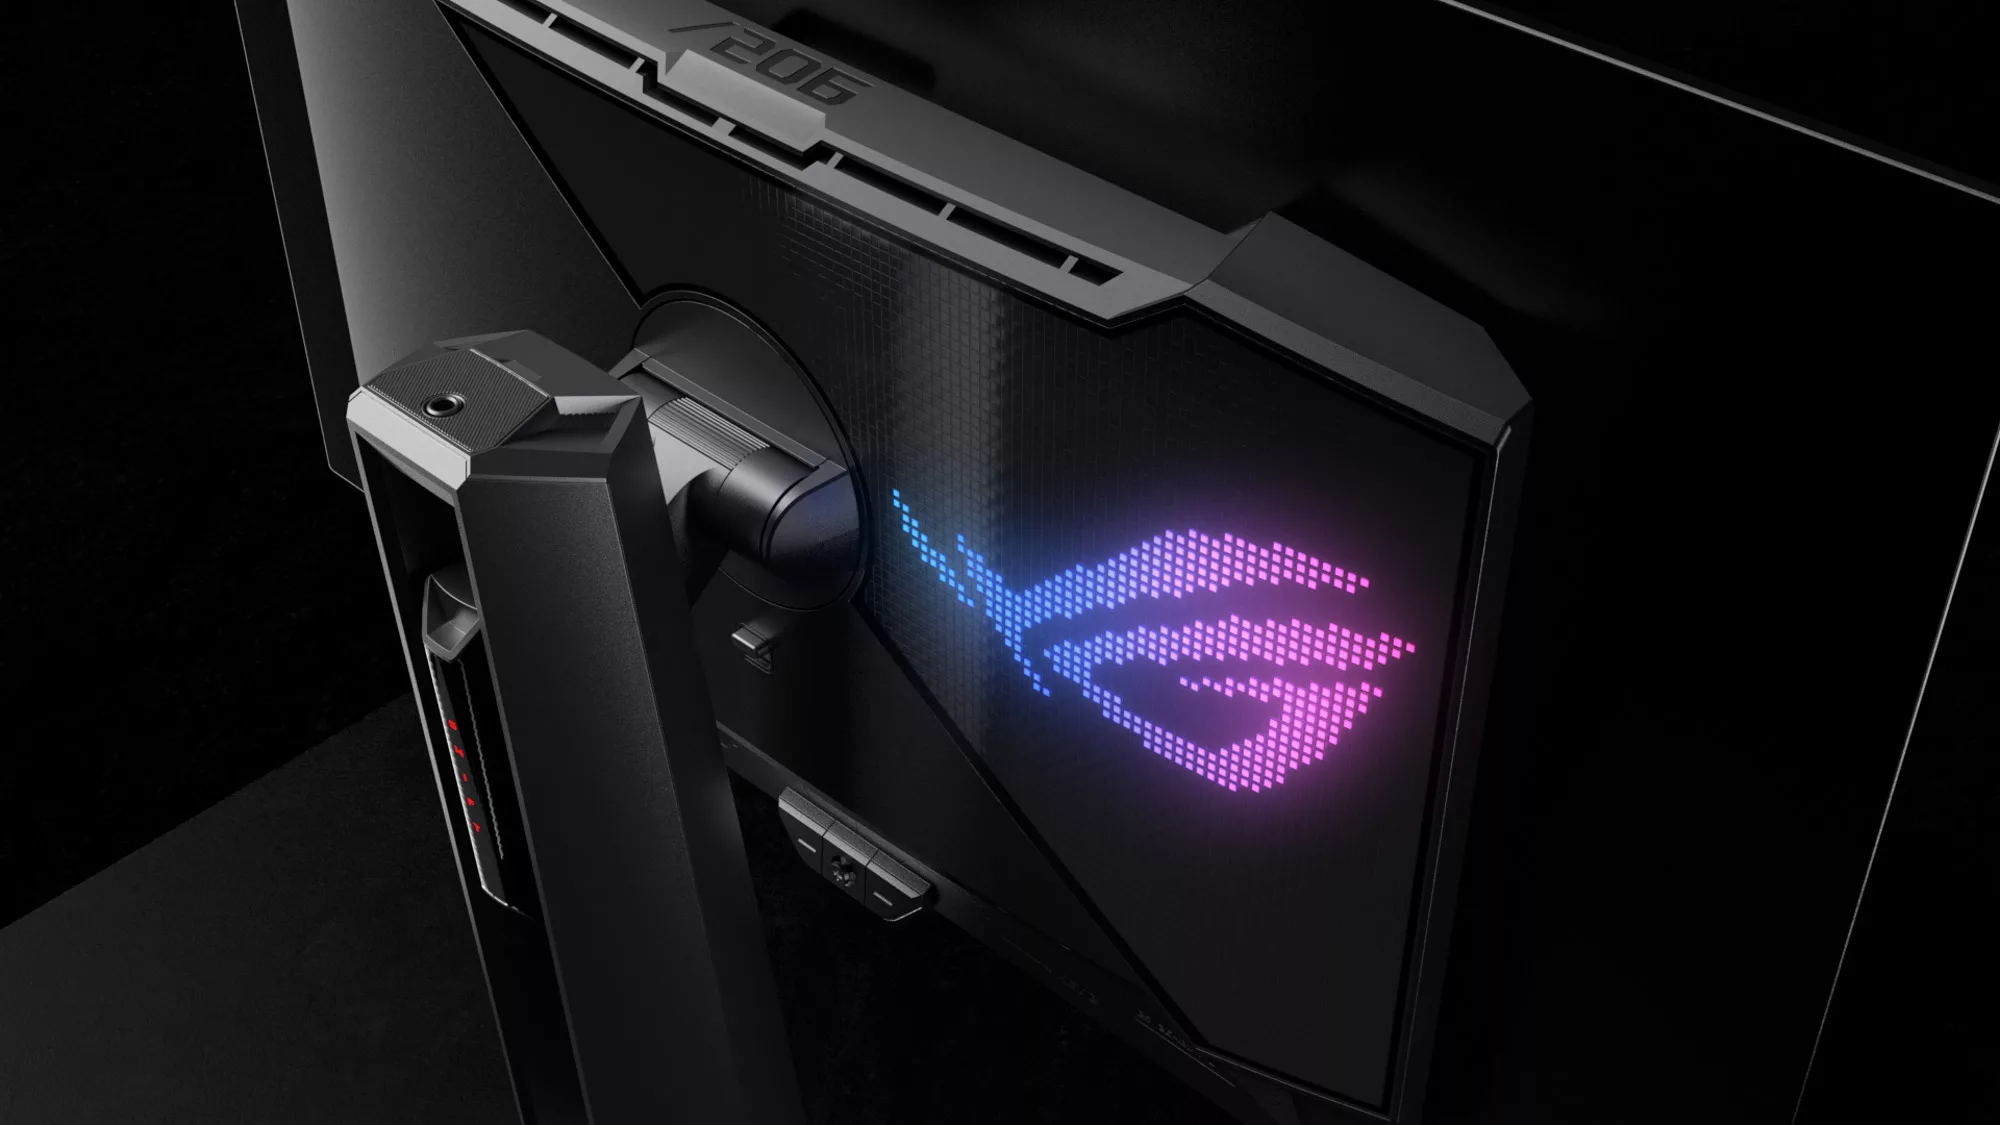 A rear view of the ROG Swift OLED PG27AQDM monitor with the RGB logo illuminated.